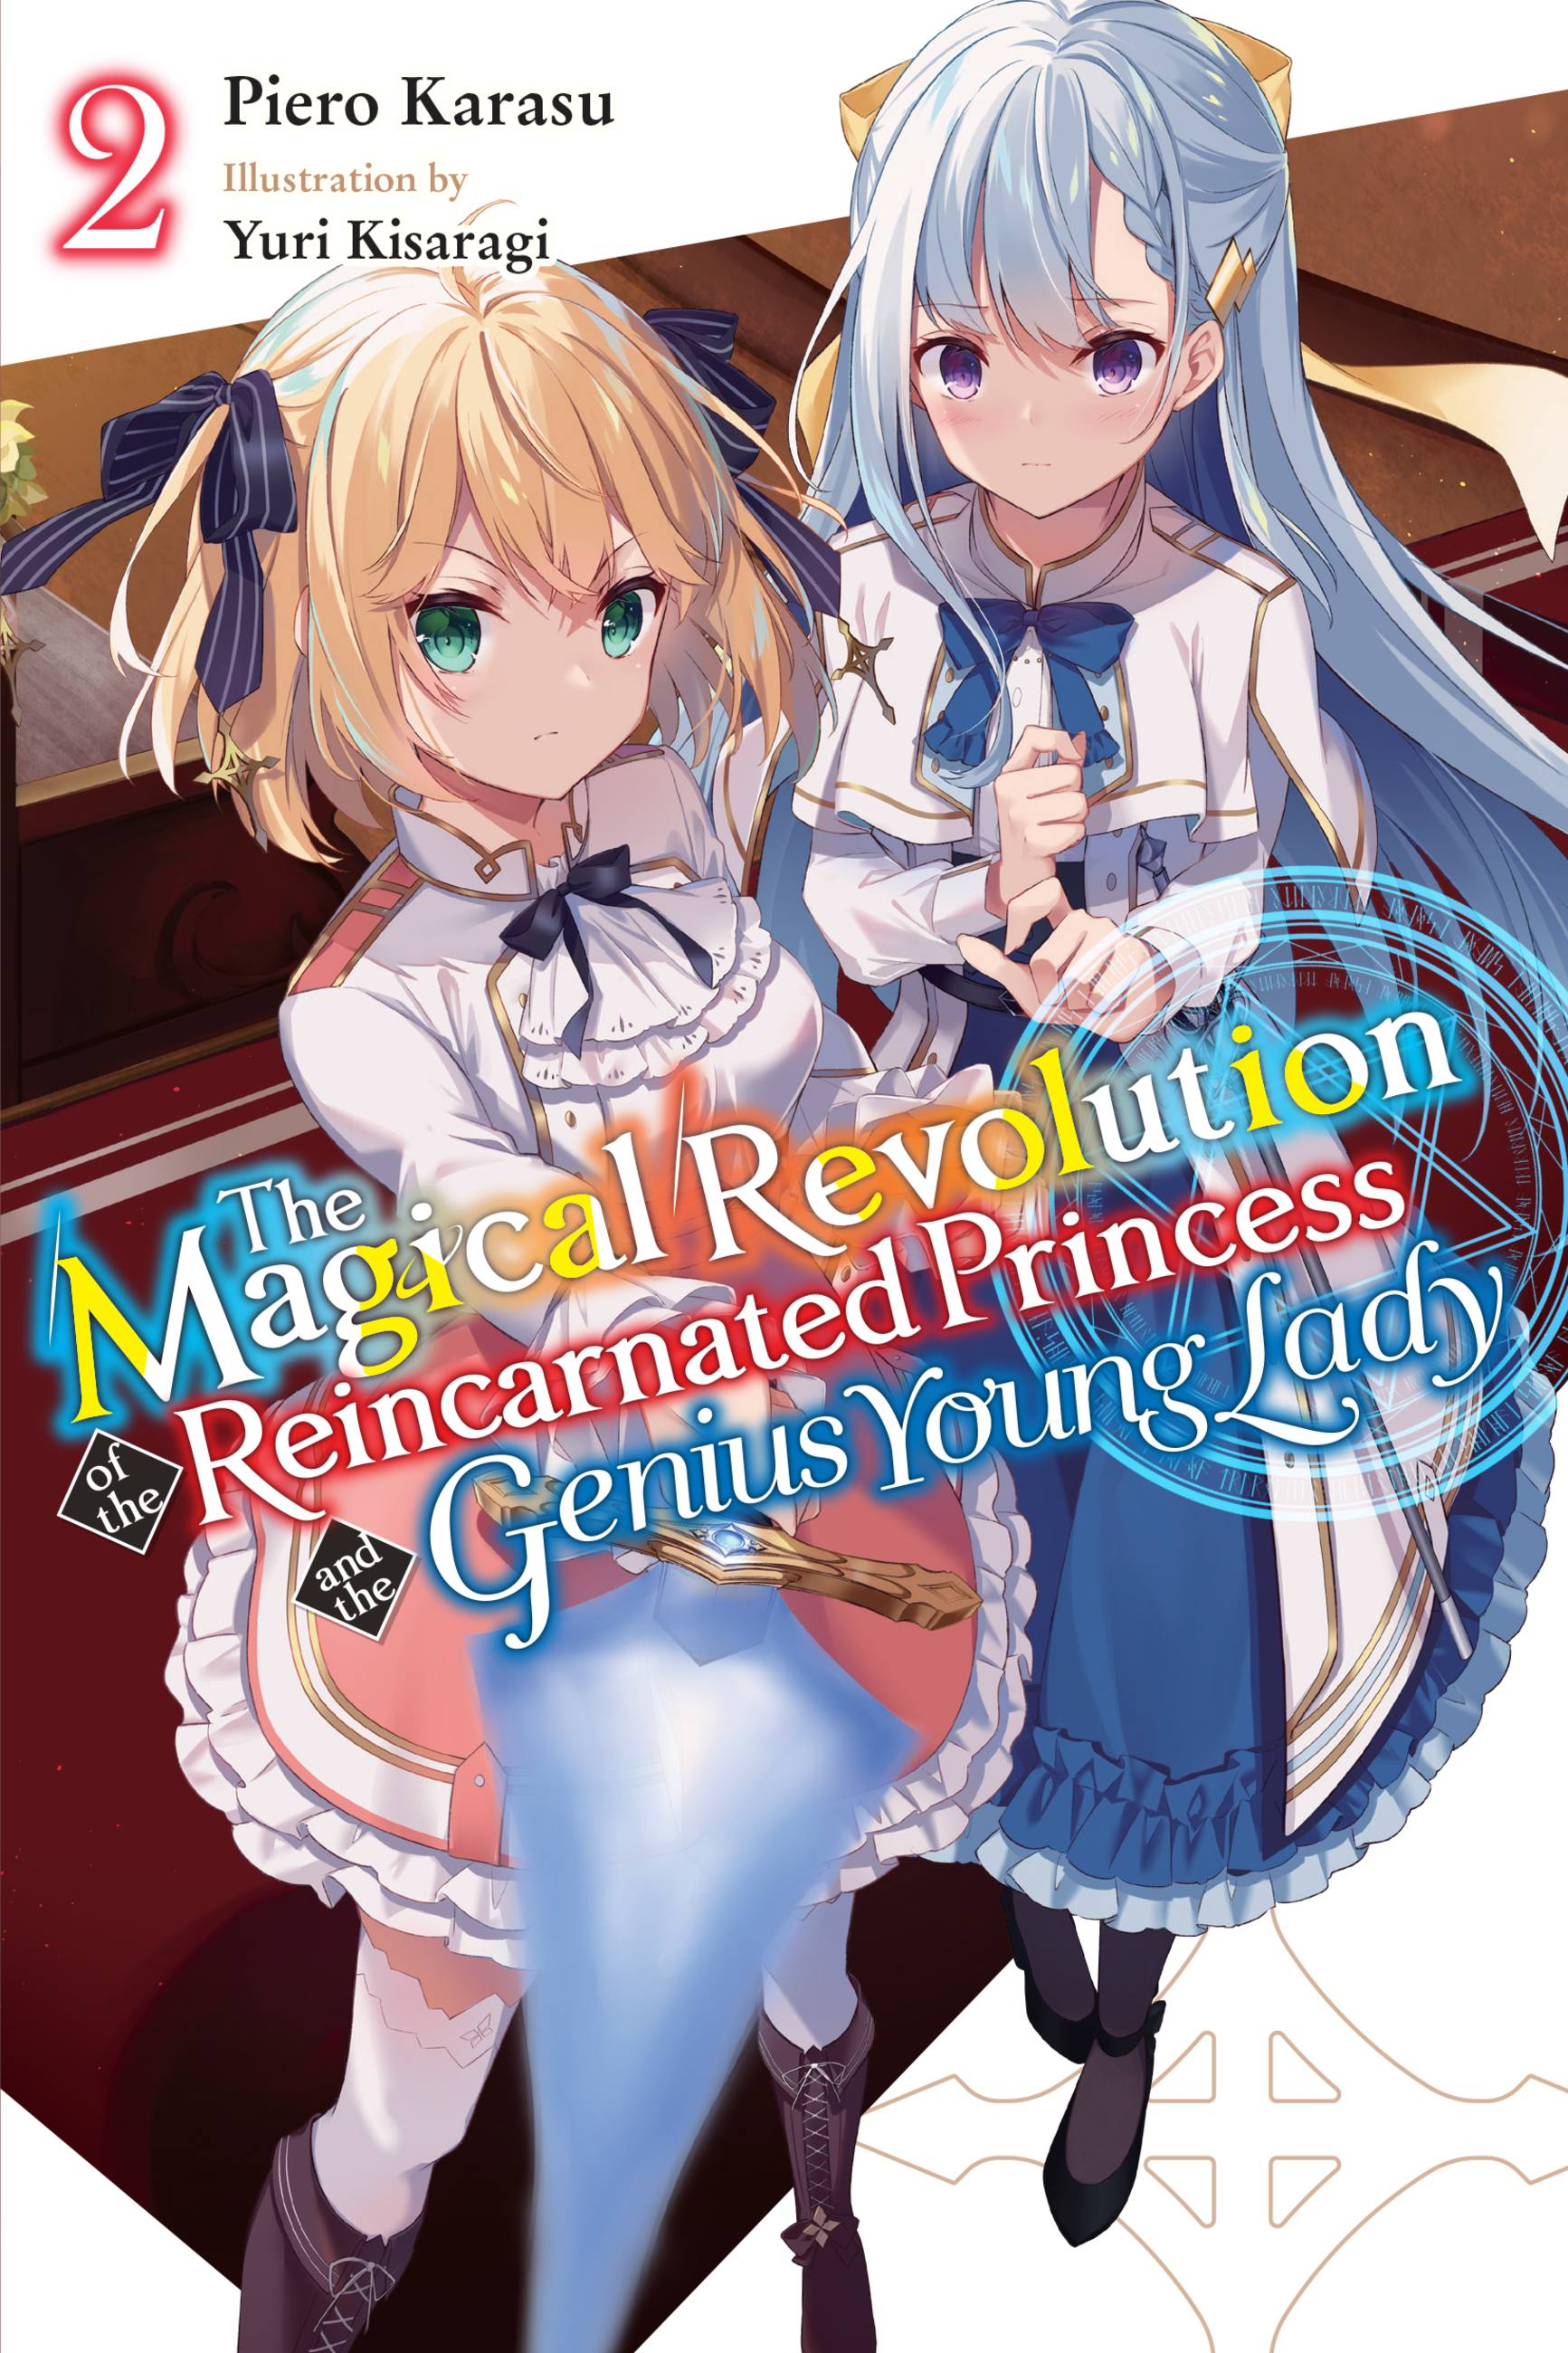 Characters appearing in The Magical Revolution of the Reincarnated Princess  and the Genius Young Lady Manga